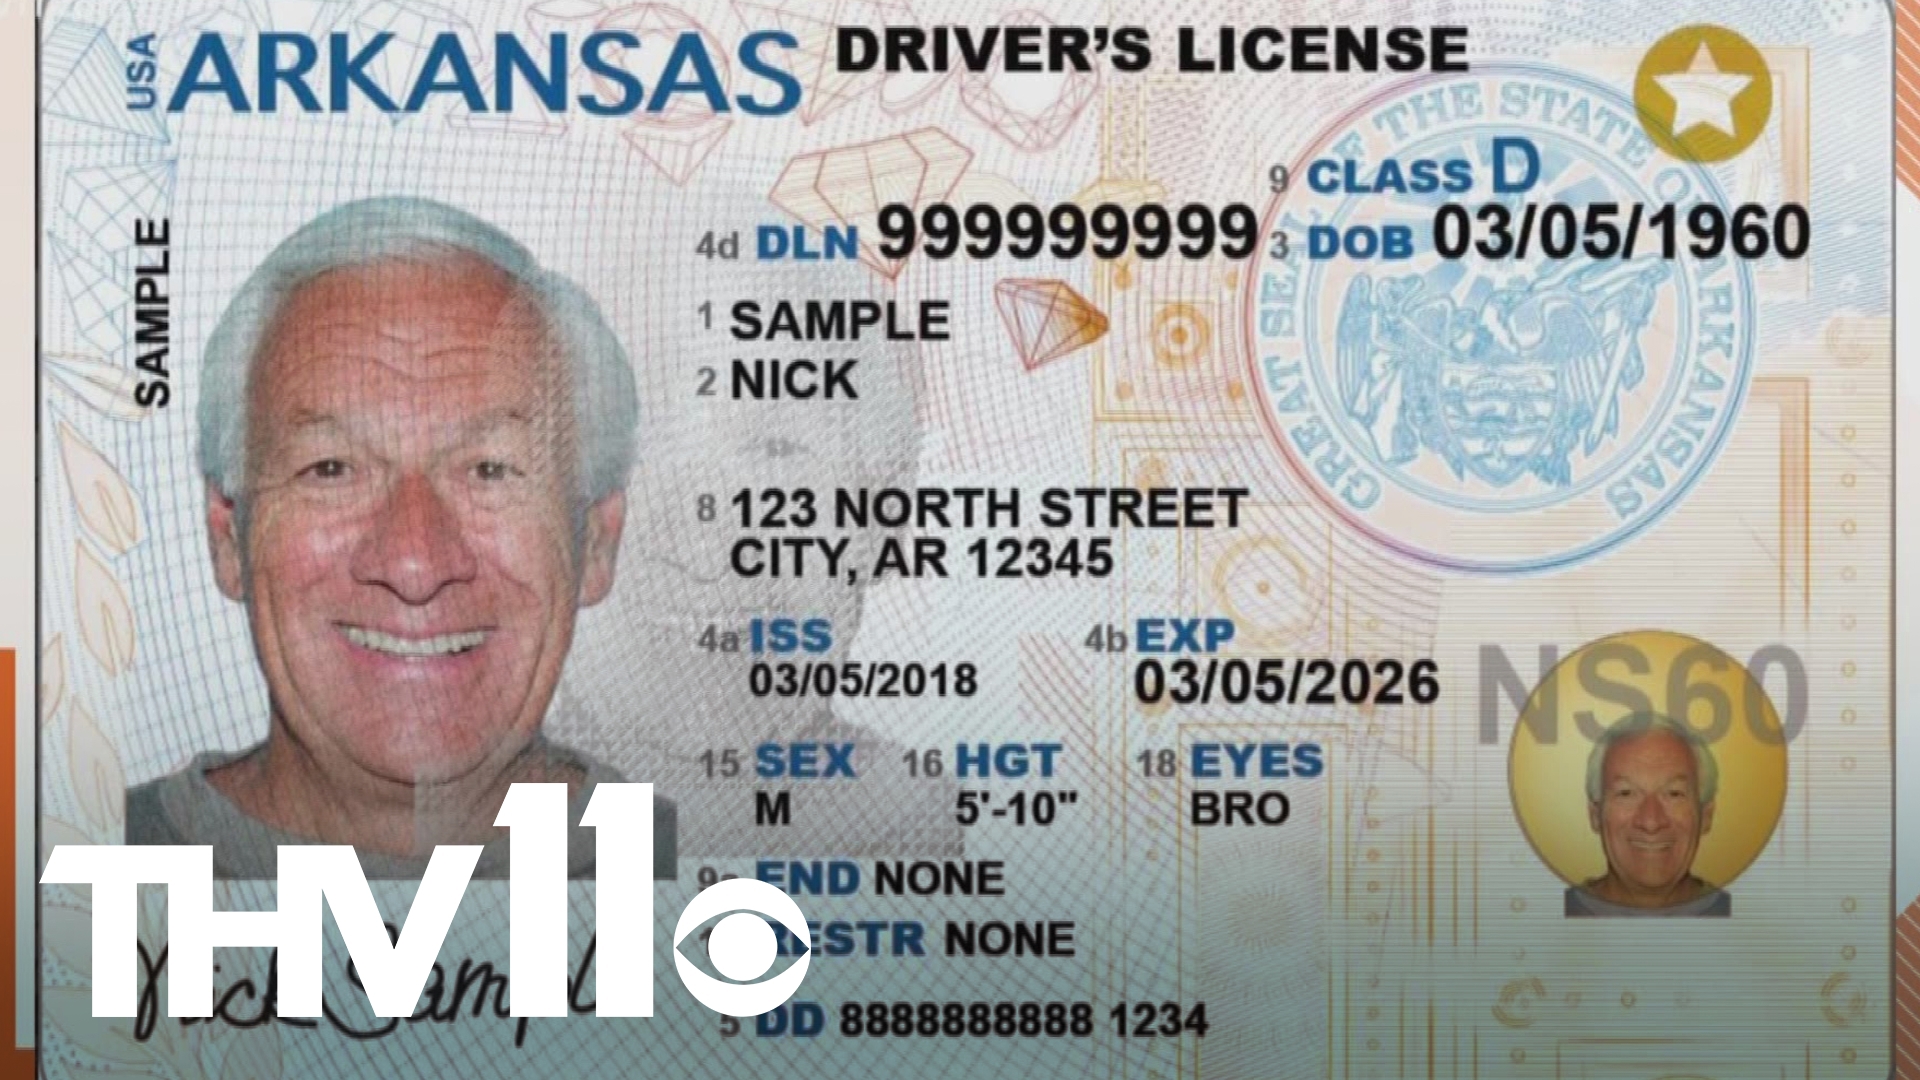 A judge has temporarily paused an Arkansas rule change that removed the ability for people to add a gender-neutral marker on their IDs.